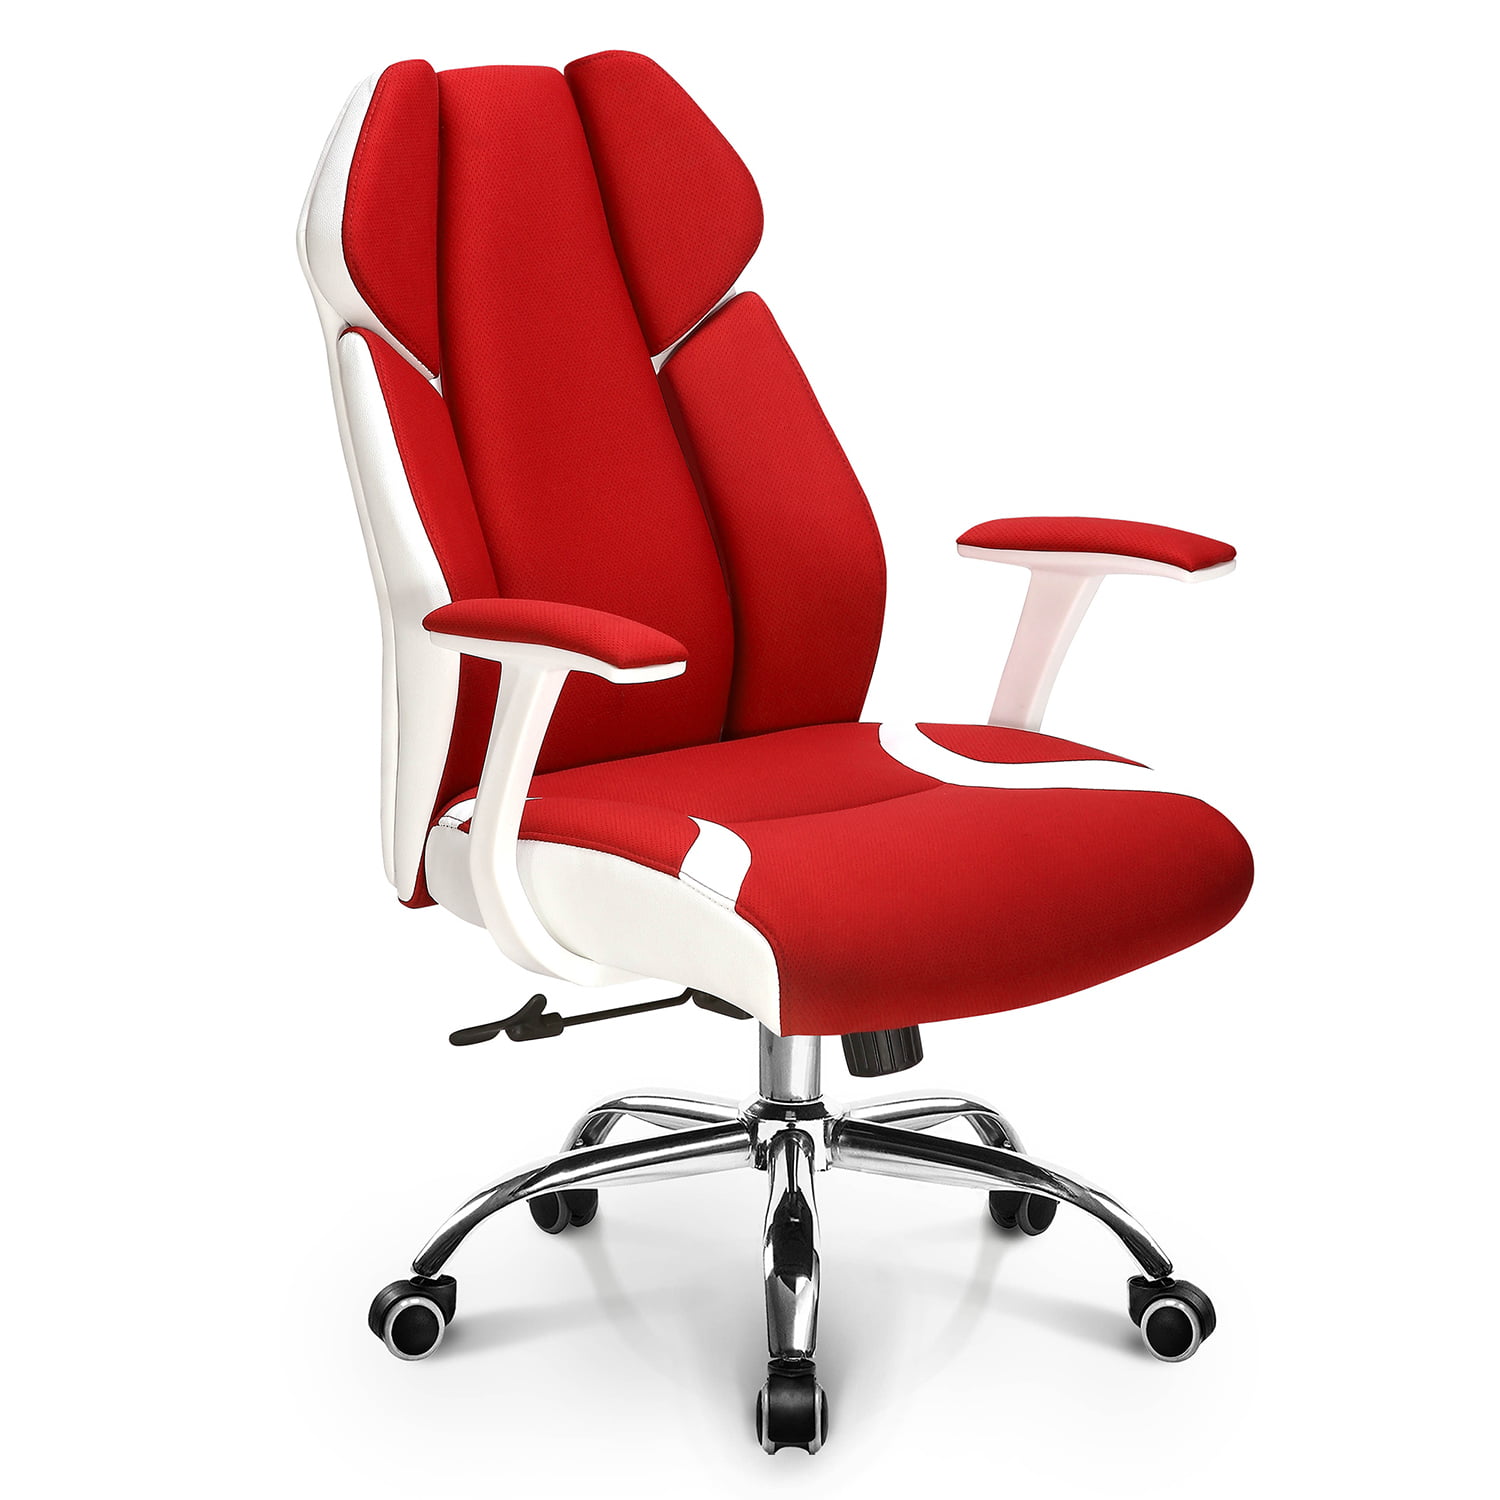 Ergonomic Office Chair Gaming Chair High Back Fabric Desk ...